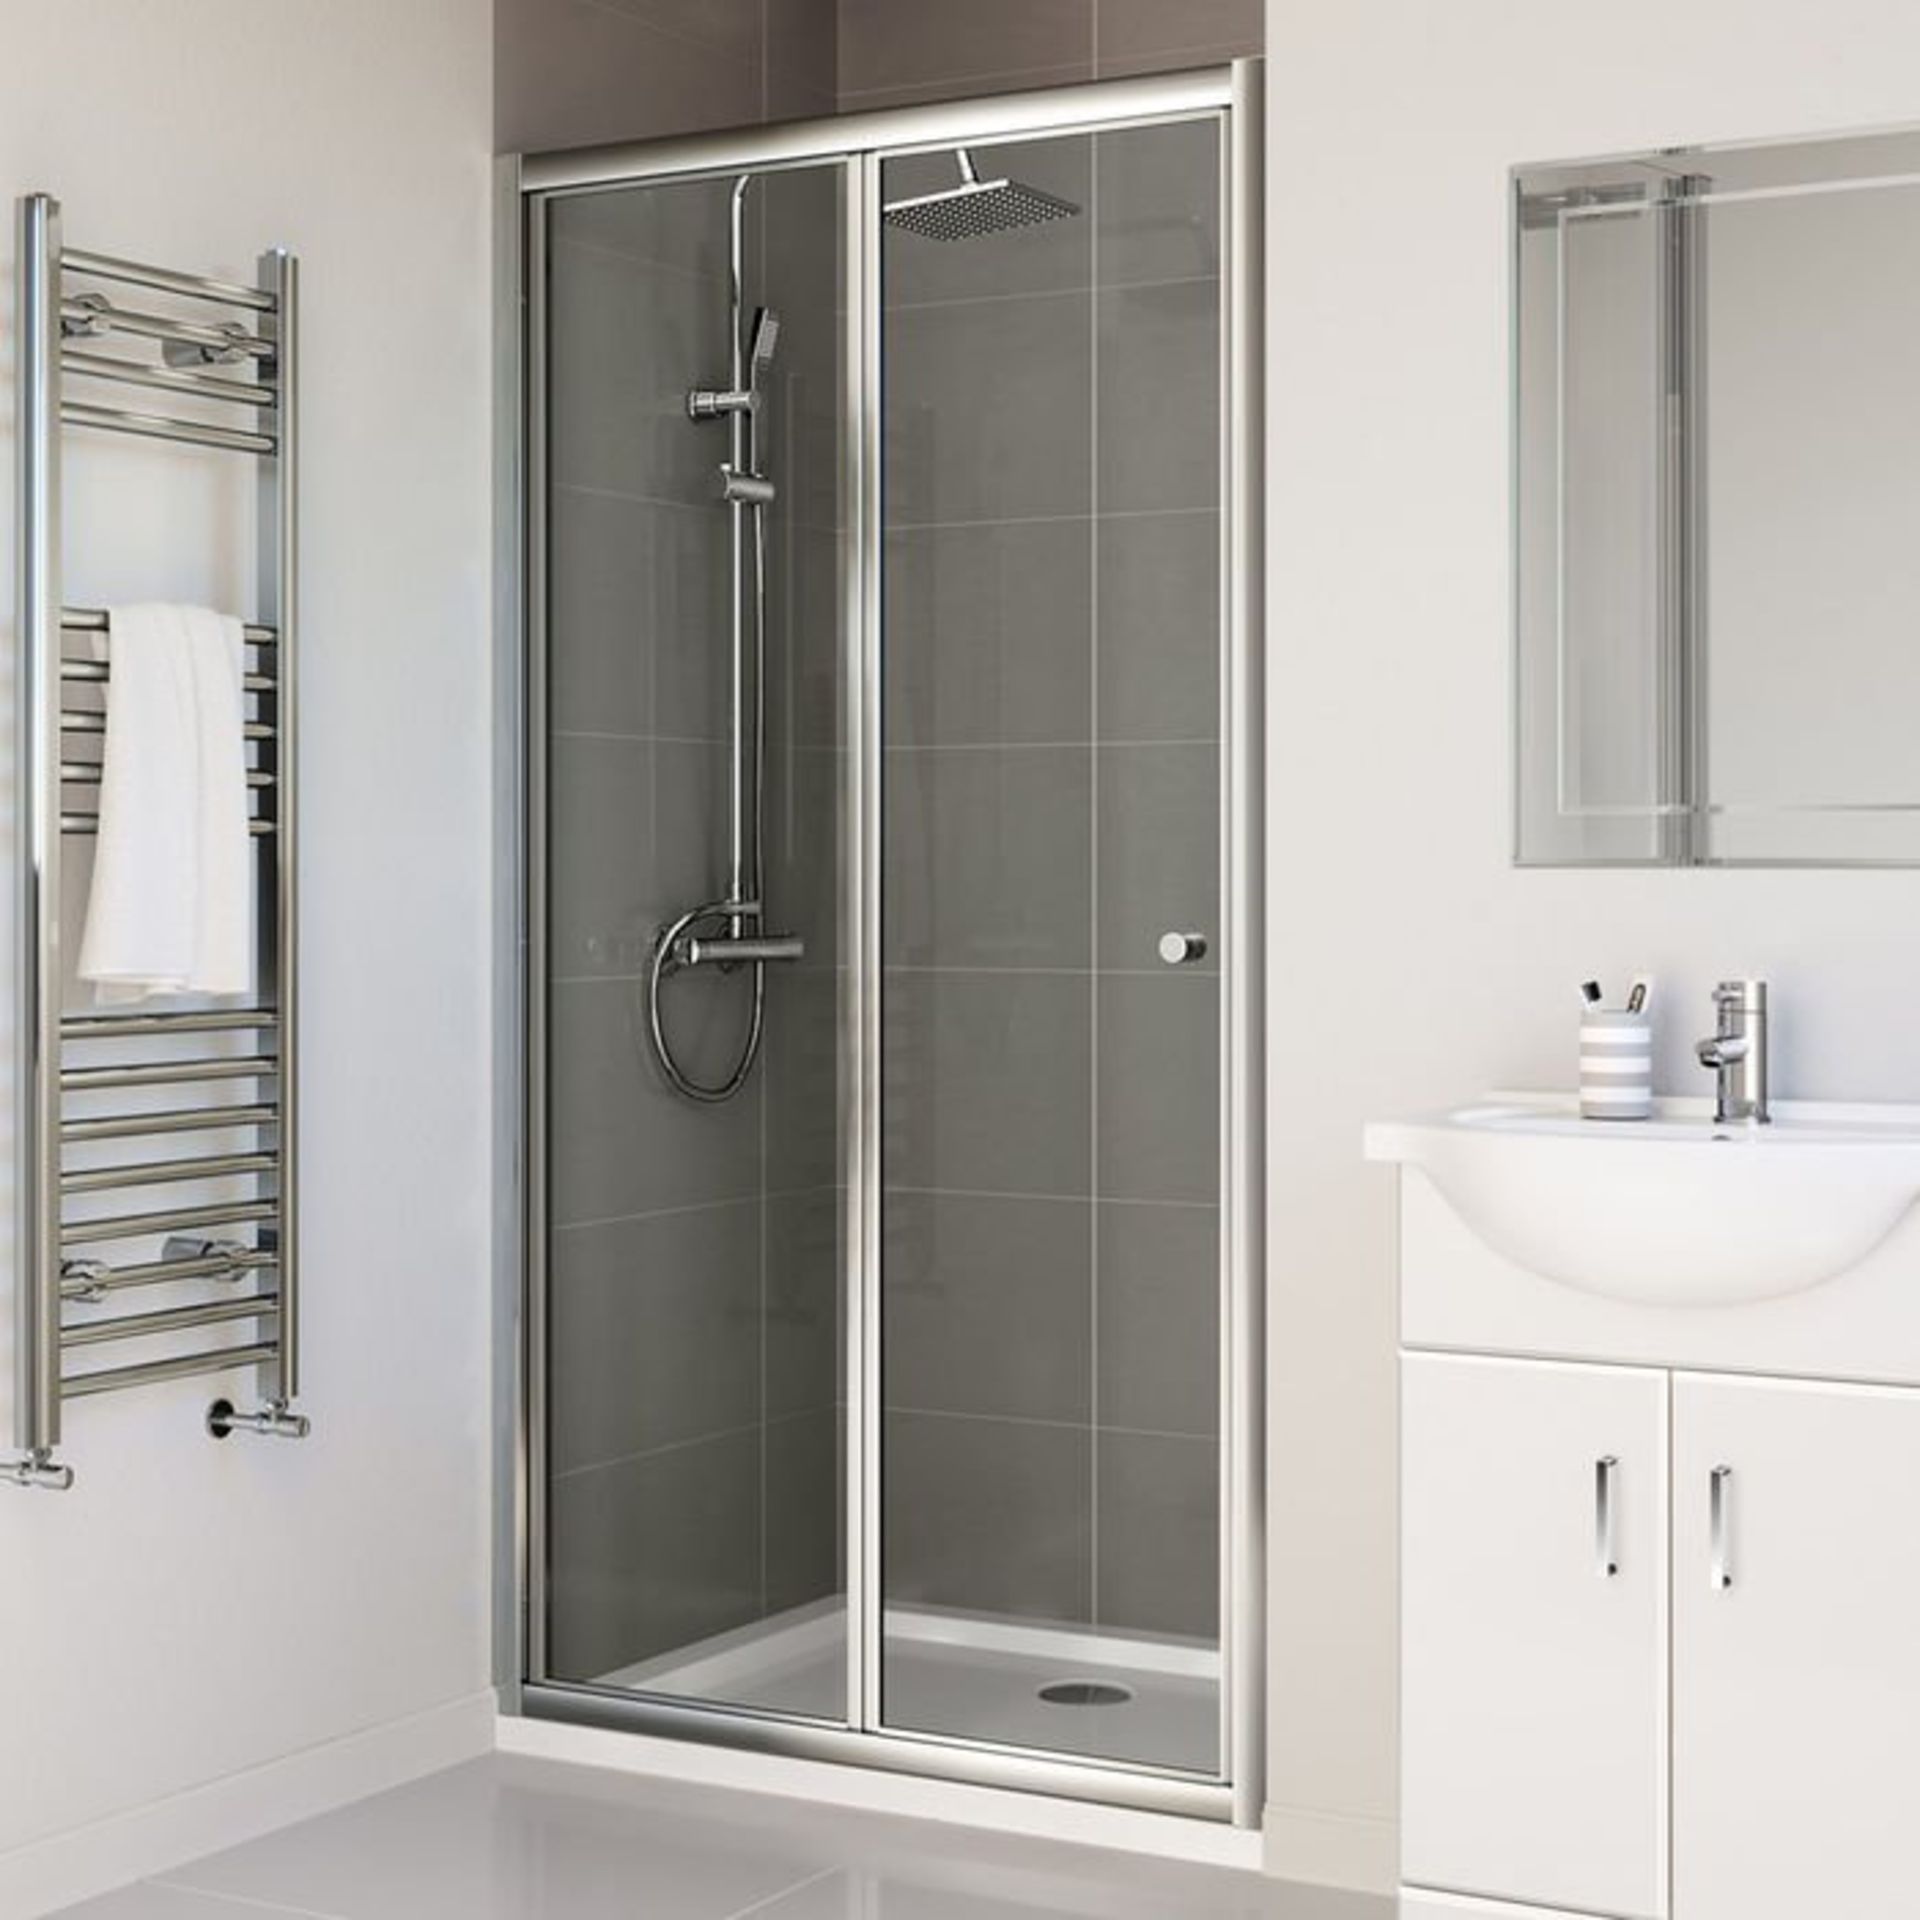 (G41) 1000mm - Elements Bi Fold Shower Door. RRP £299.99. 4mm Safety Glass Fully waterproof tested